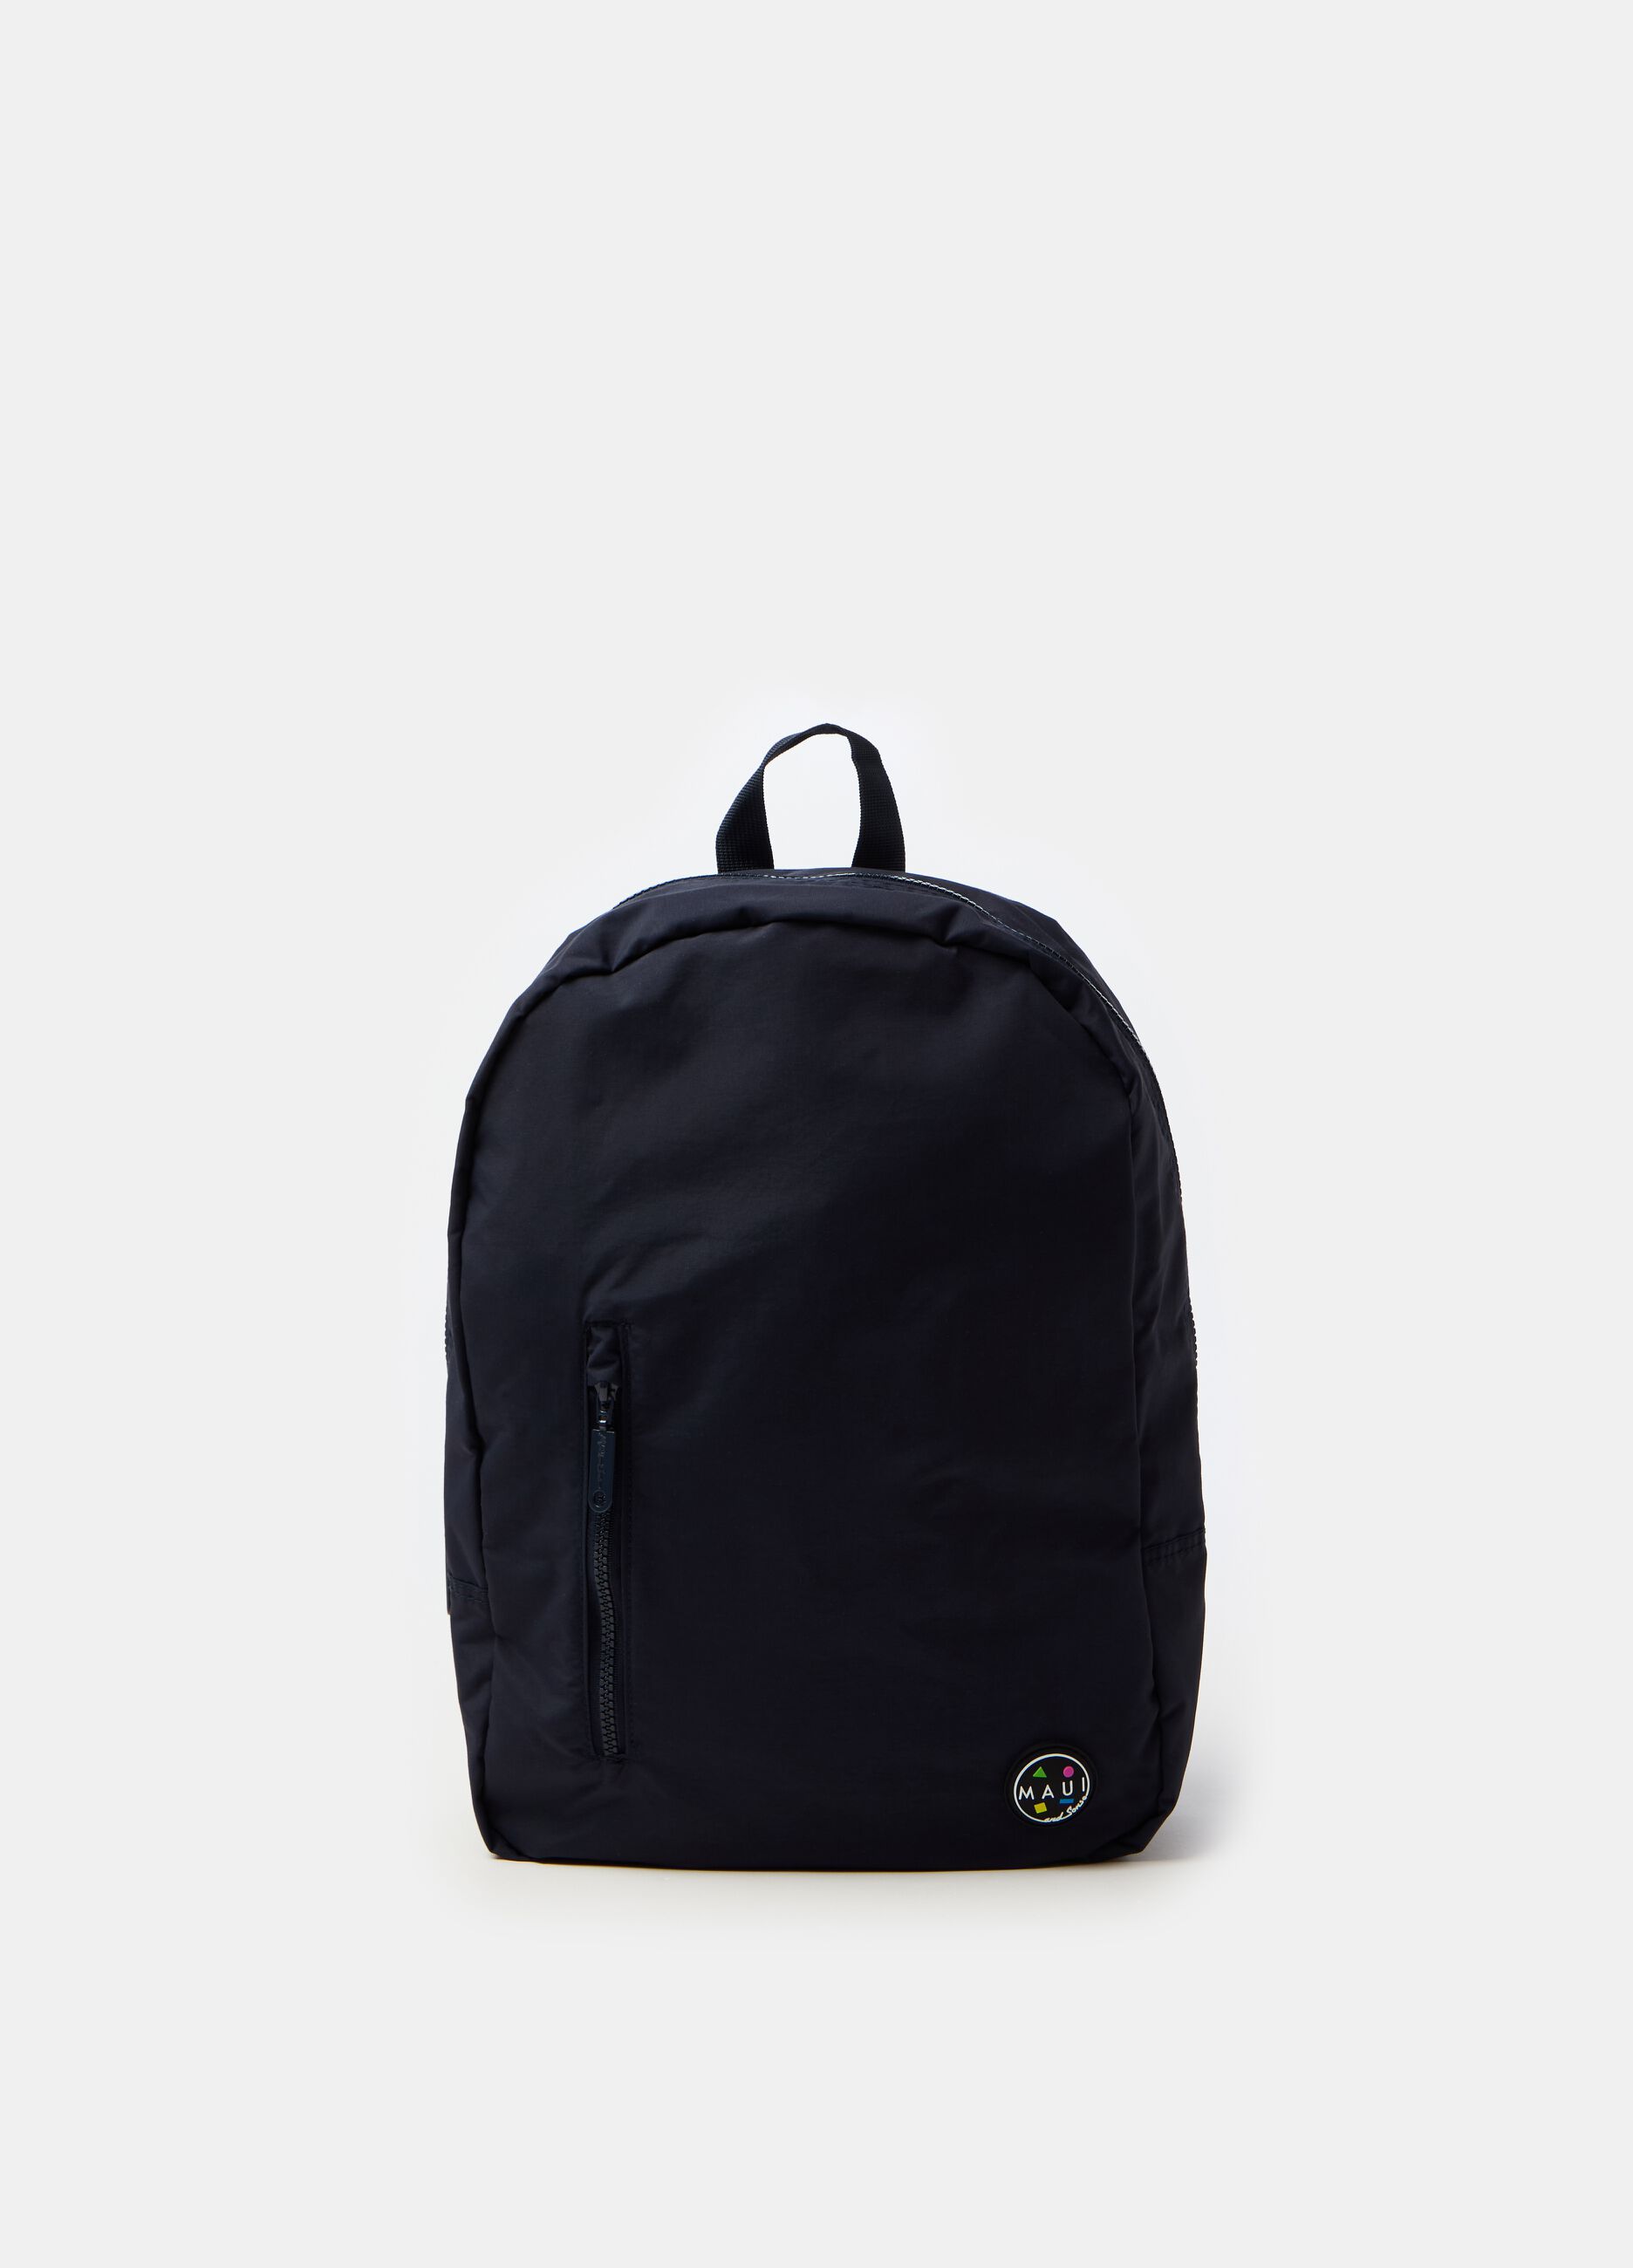 Oval backpack with outside pocket